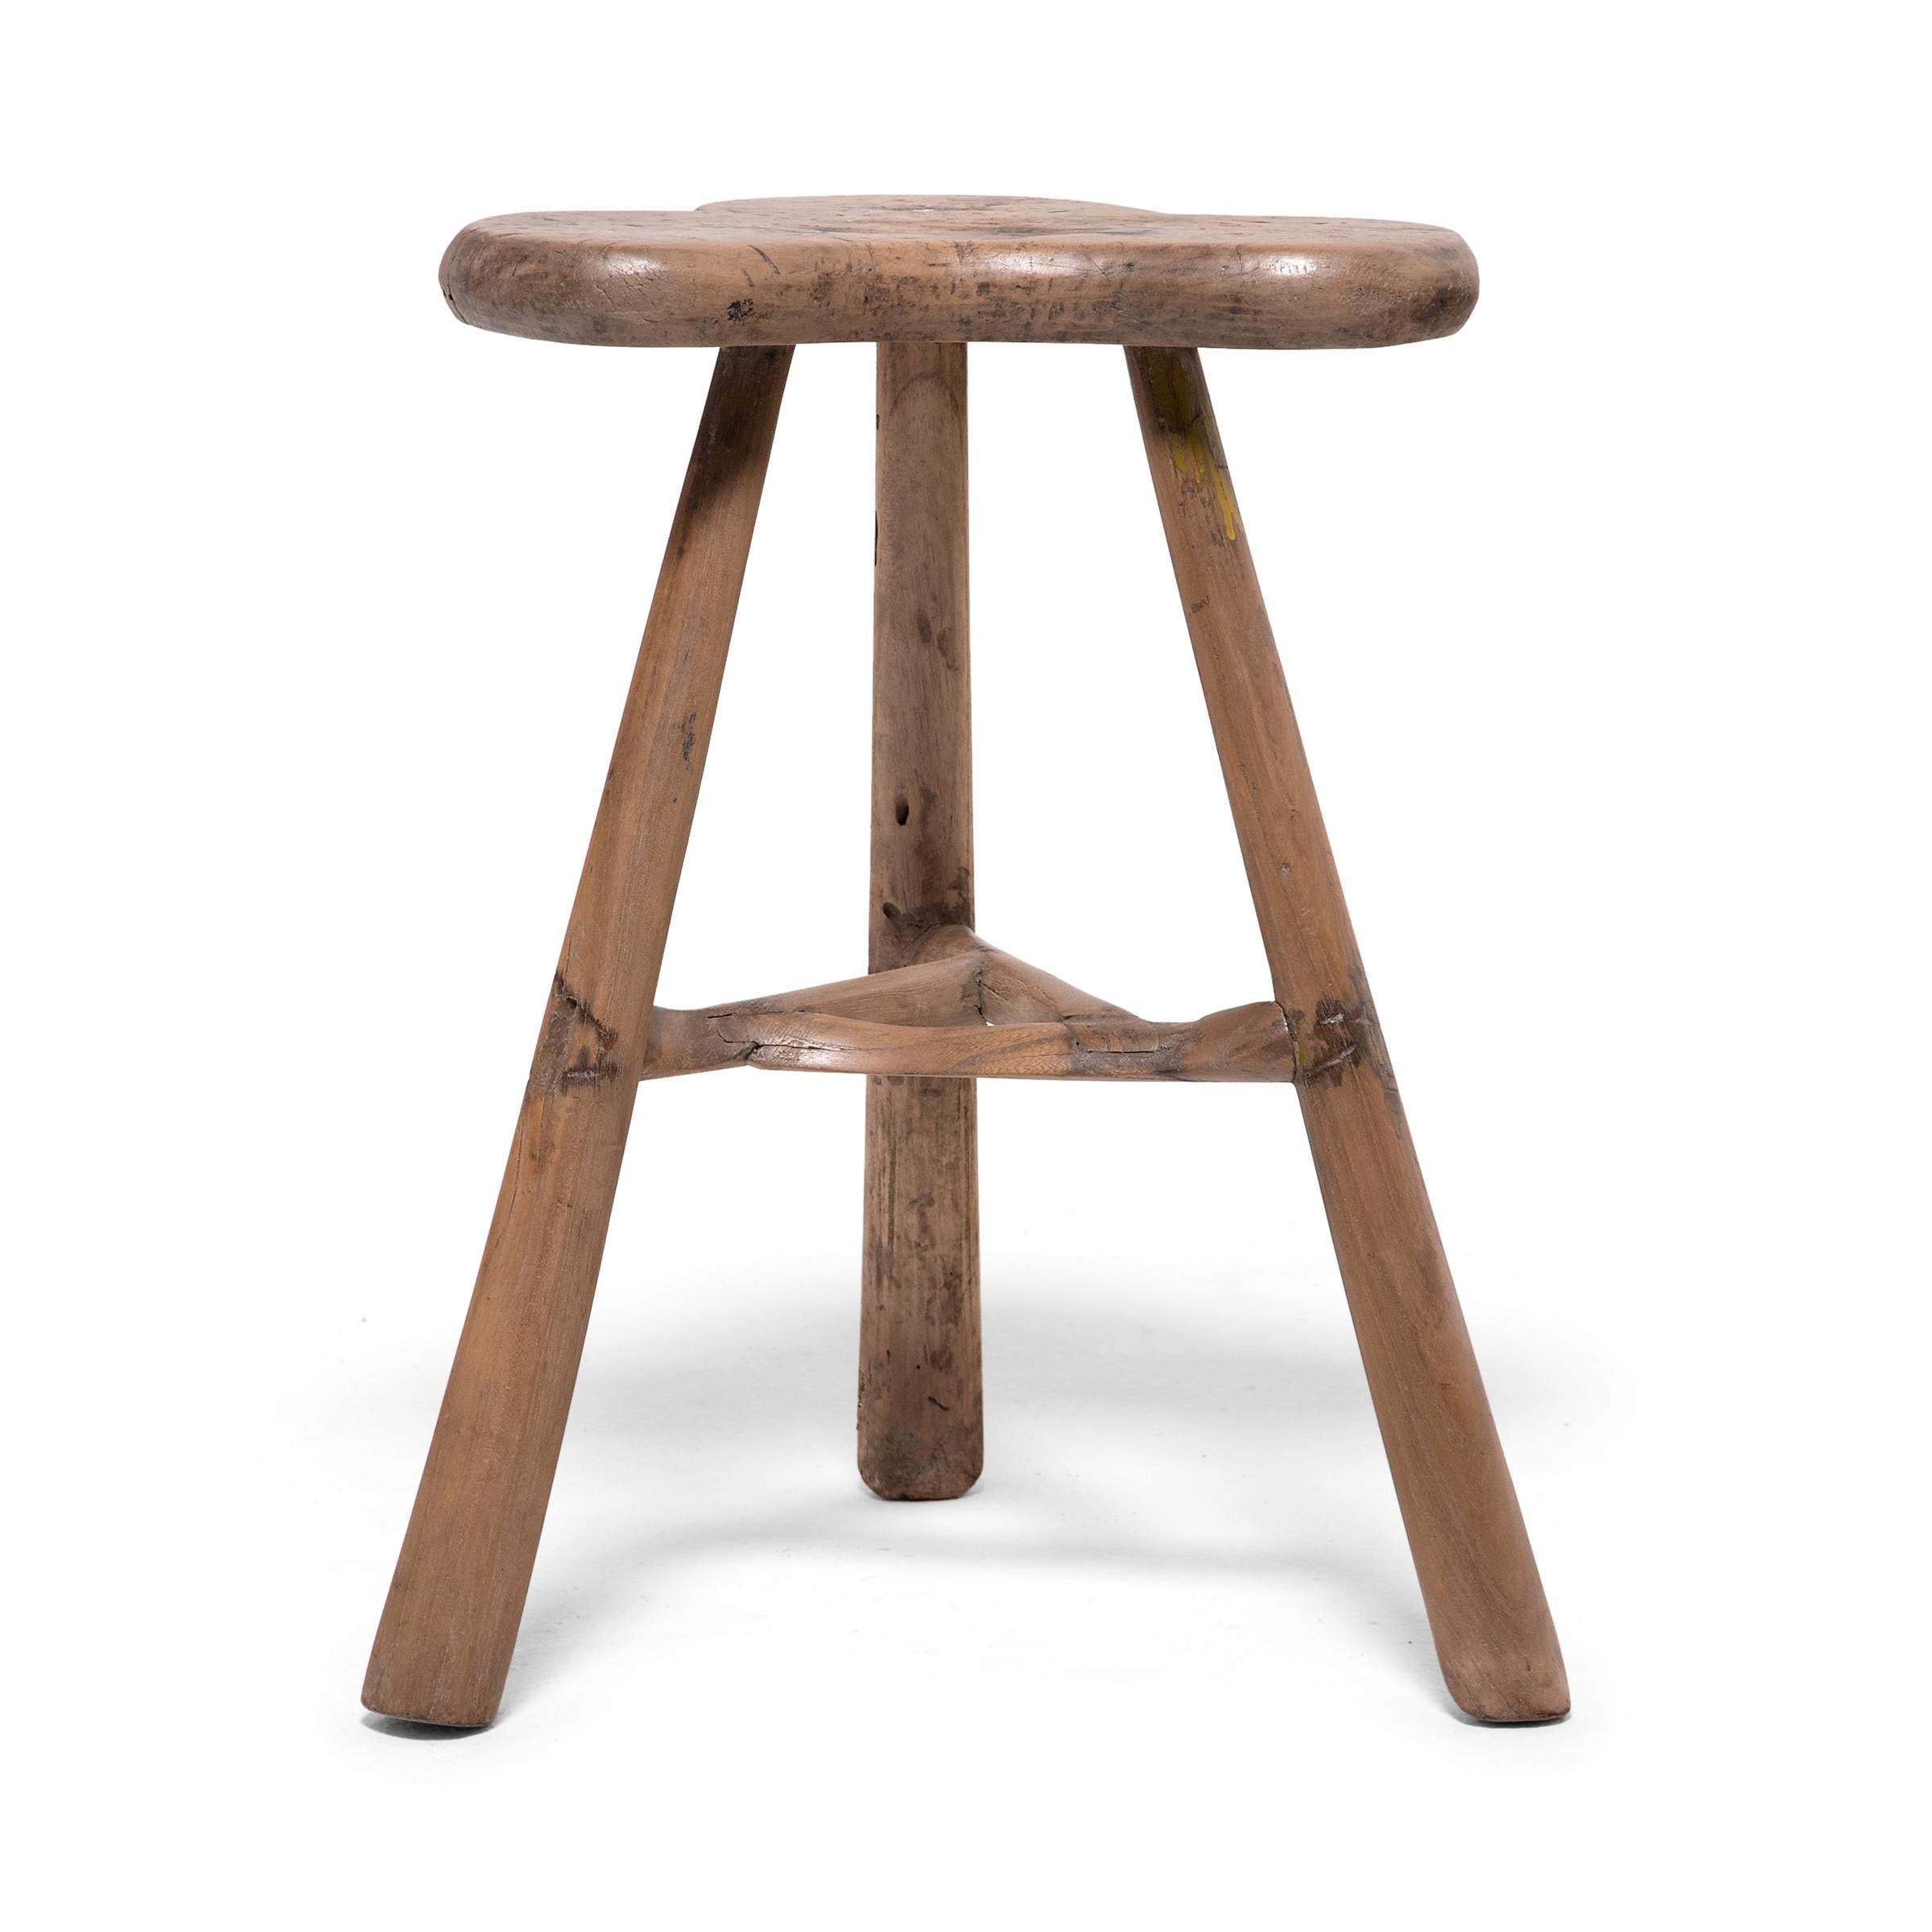 Crafted of Chinese cypress using mortise-and-tenon joinery, this everyday stool from Hebei province has a relaxed presence and a graceful silhouette. Three gently tapered legs support a trefoil seat, which has been shaped to resemble a butterfly, a